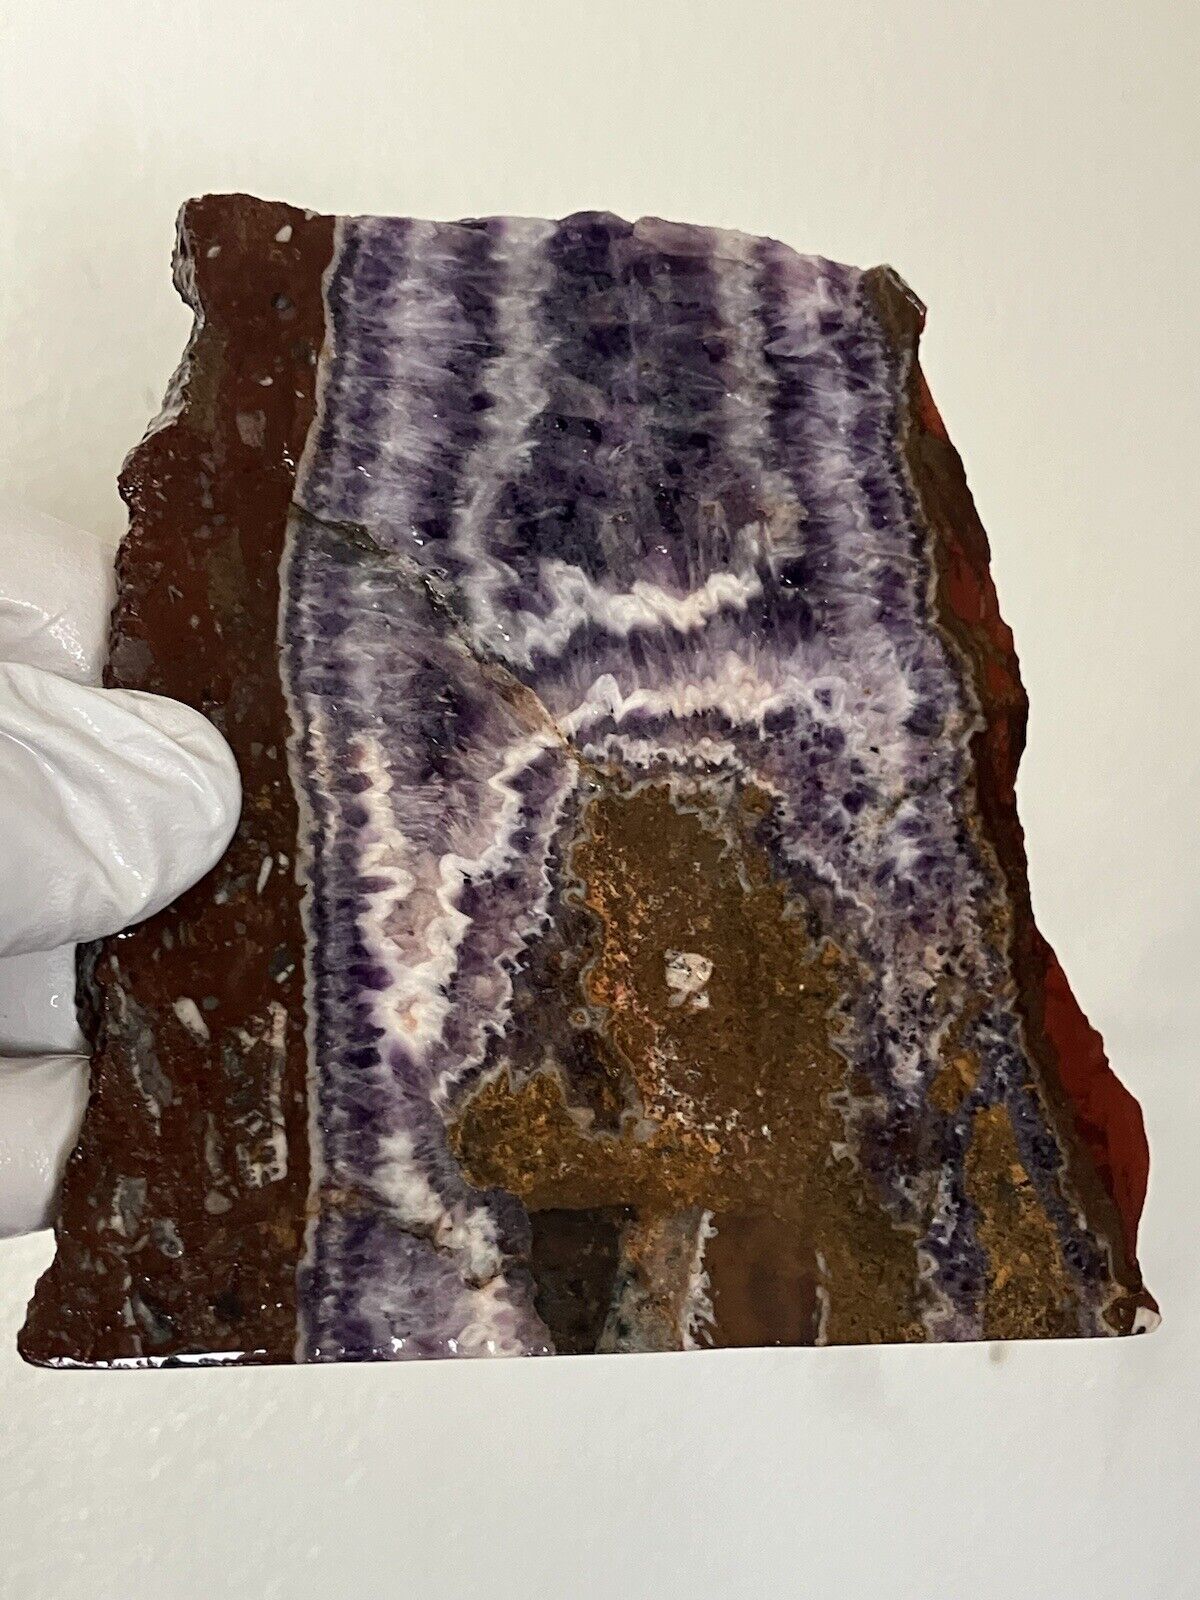 Stunning Chevron Amethyst Slab 0.68 Pounds Thick & Lovely / Lapidary